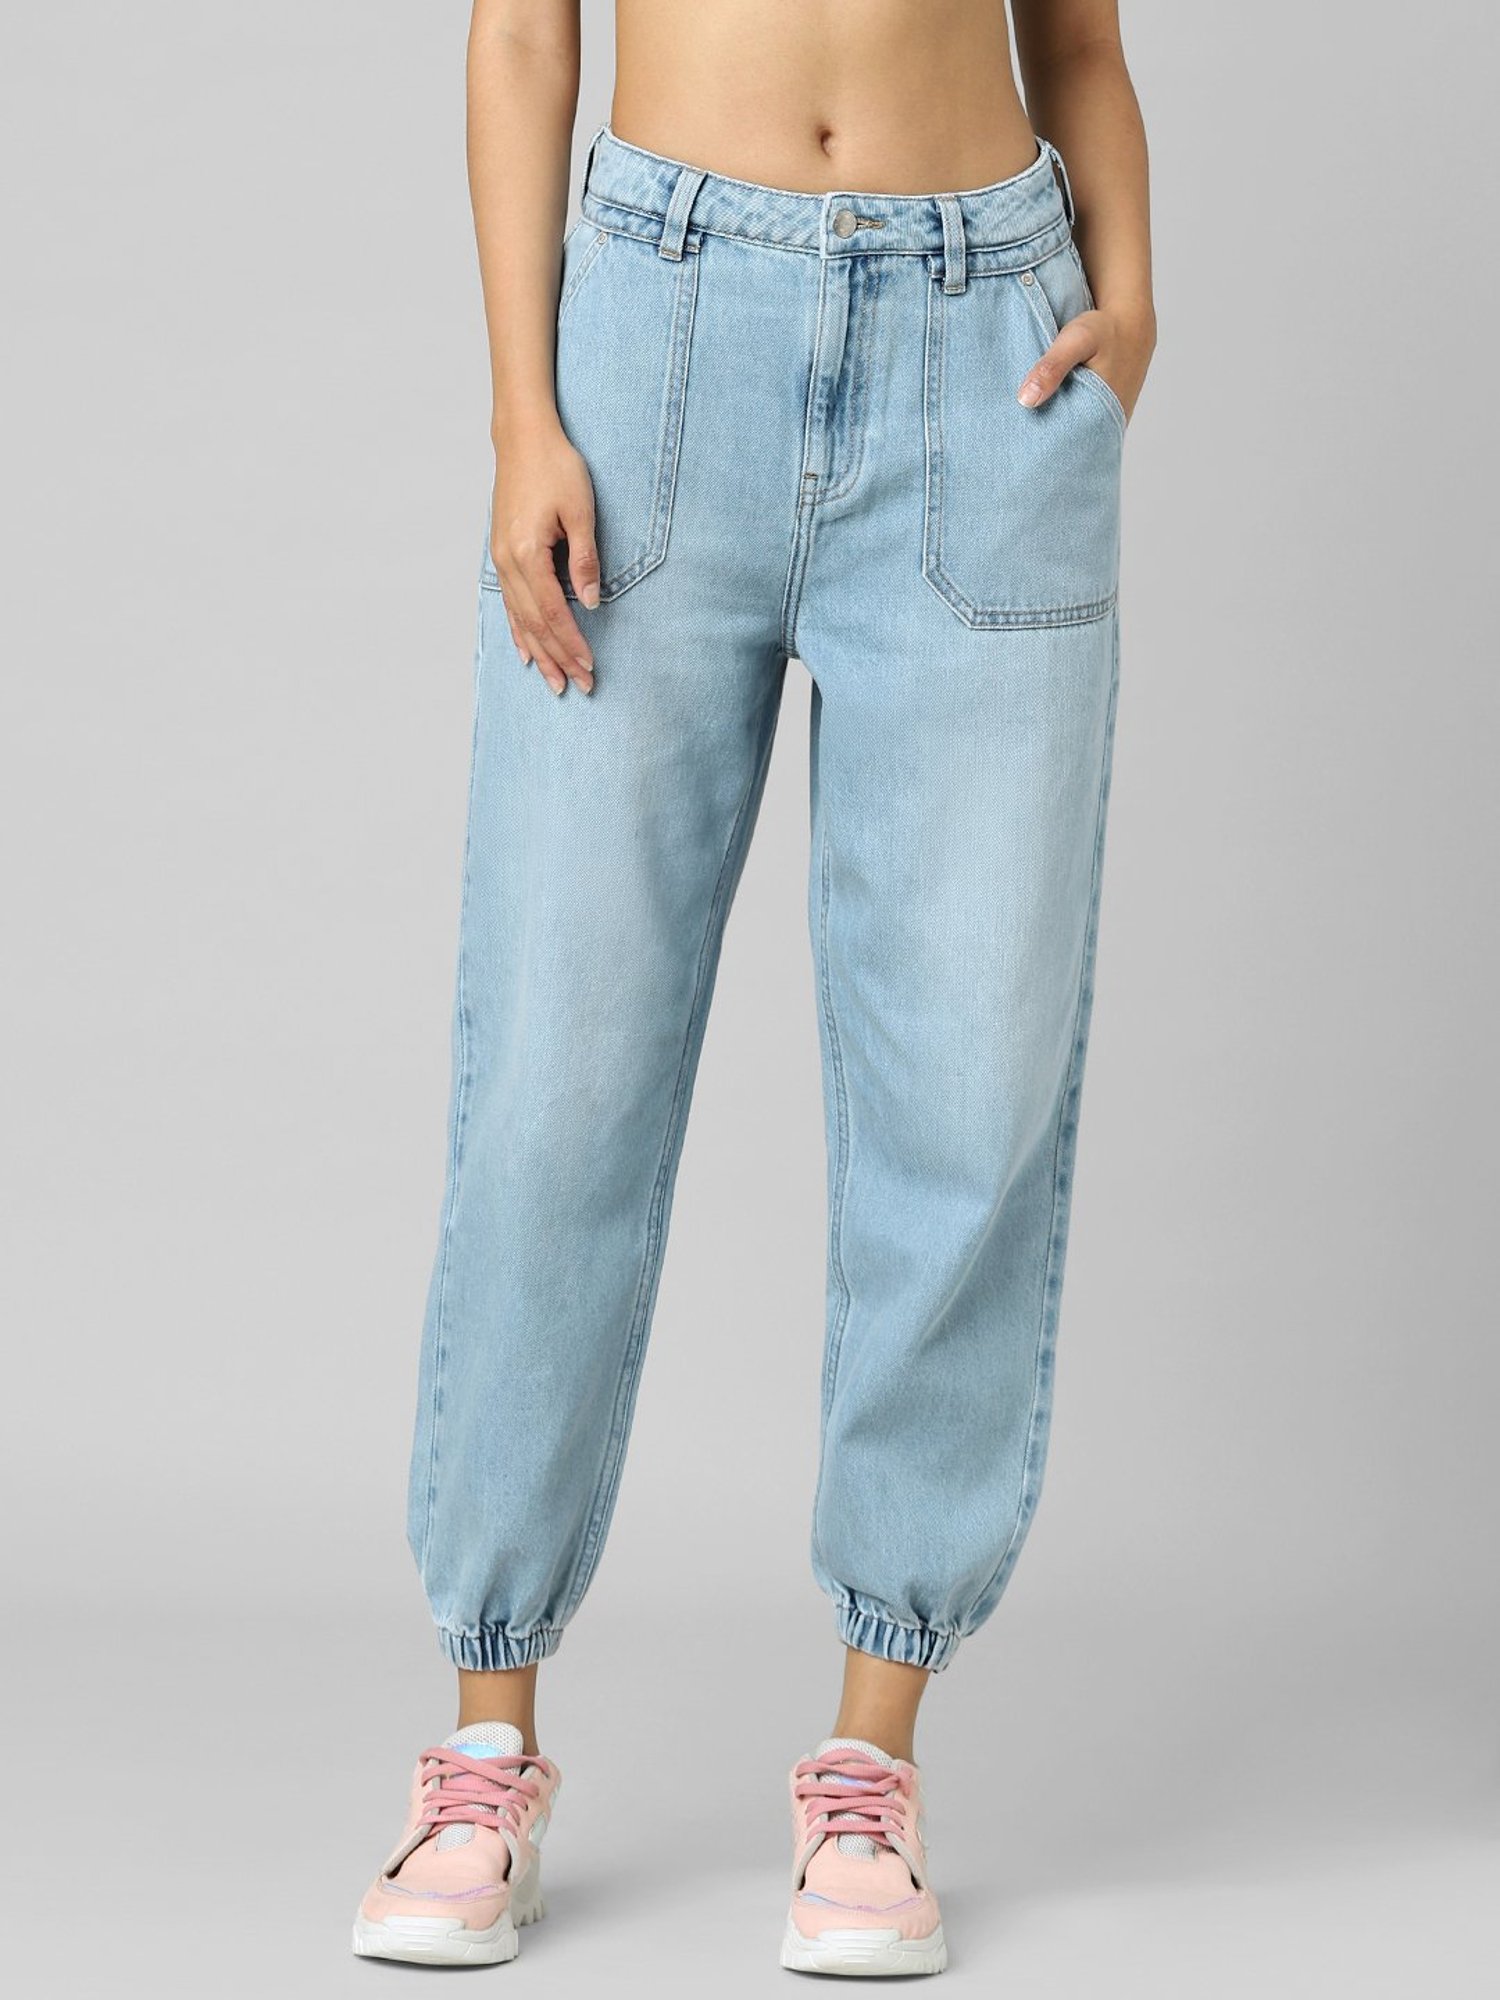 Buy Only Blue Cotton High Rise Jeans for Women Online @ Tata CLiQ